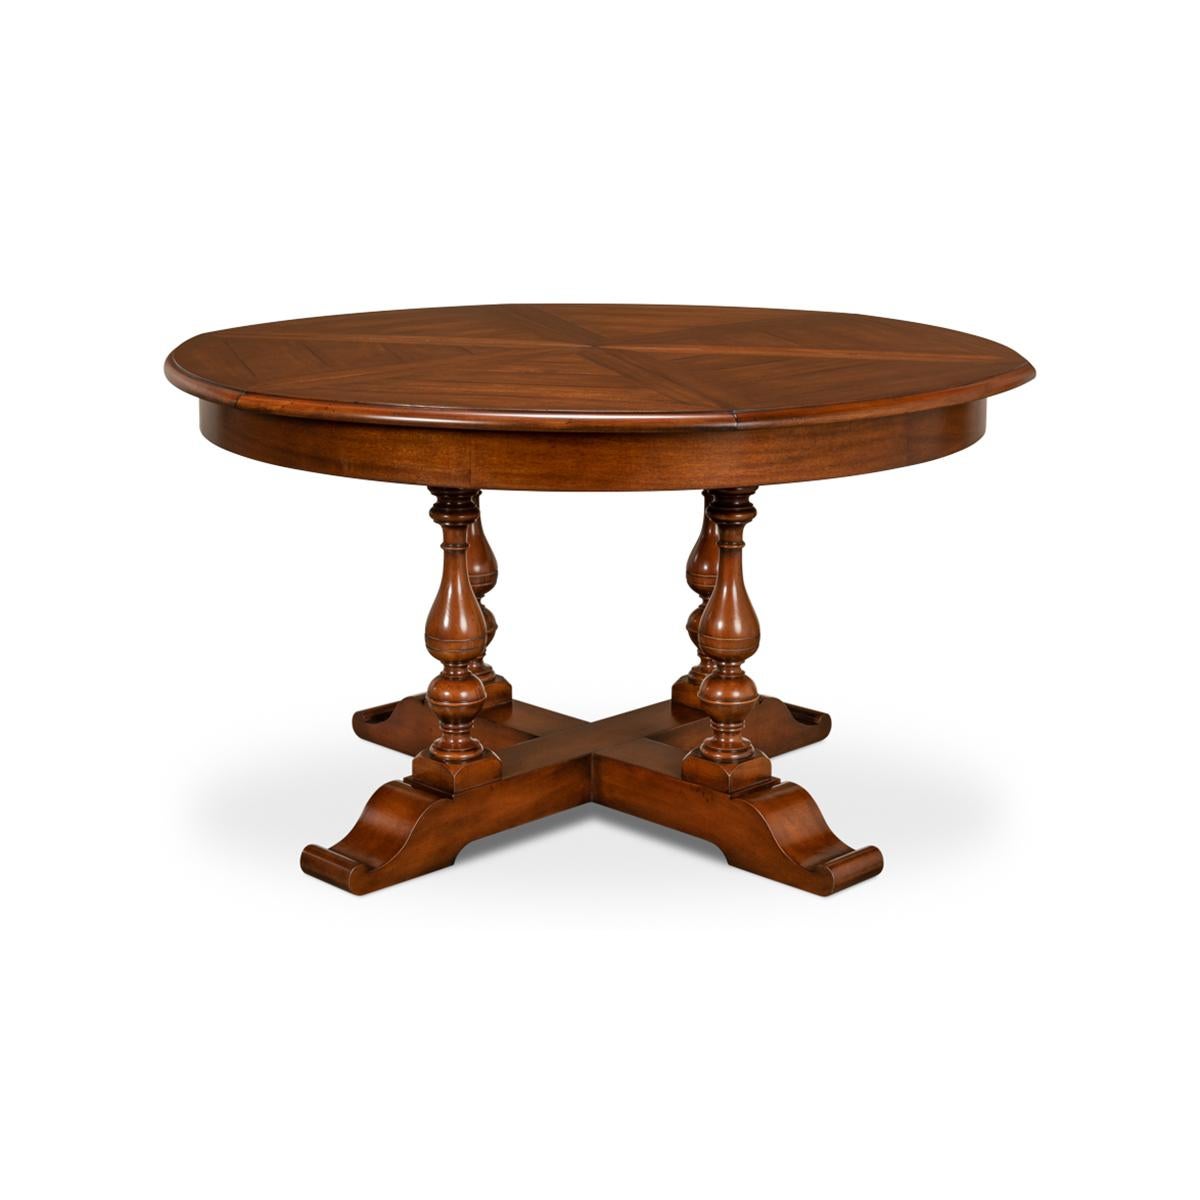 Early English style round extendable jupe dining table extending to 70 inches. Walnut table is veneered in finely figured walnut segments and supported on four solid vase-shaped turned legs leading to the X form base.

The table extends from 54 to